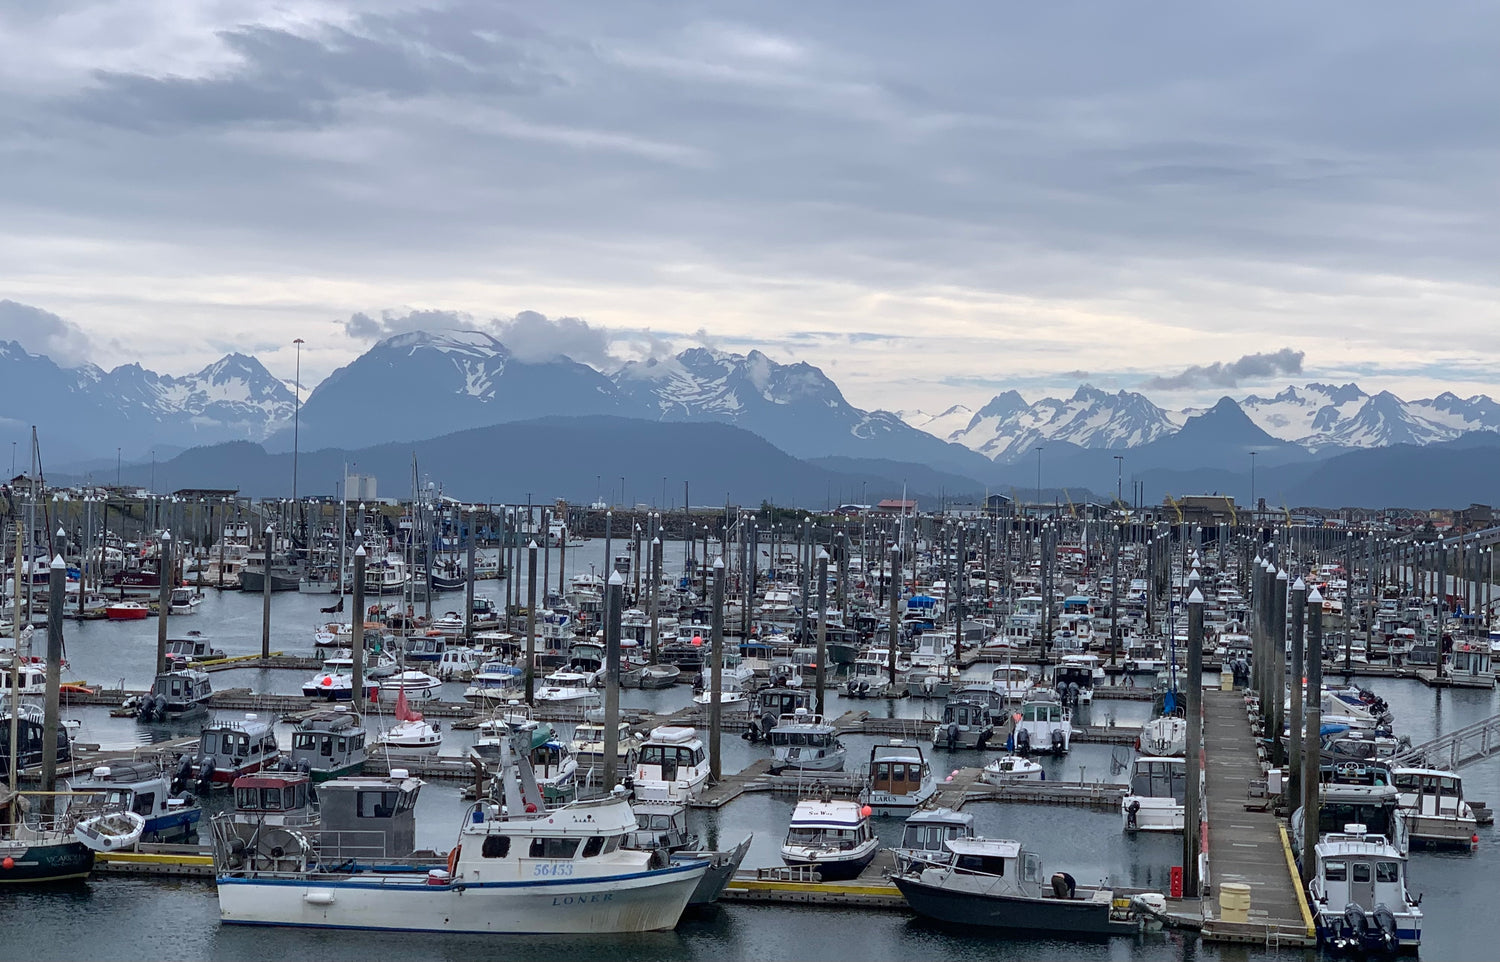 A photo of the Homer small boat harbor where Kodiak Rush's boat, the Lila Aurora, was docked in the summer of 2022. There are hundreds of boats in the foreground, snowcapped mountains across the entire horizon, and gray skies overhead.